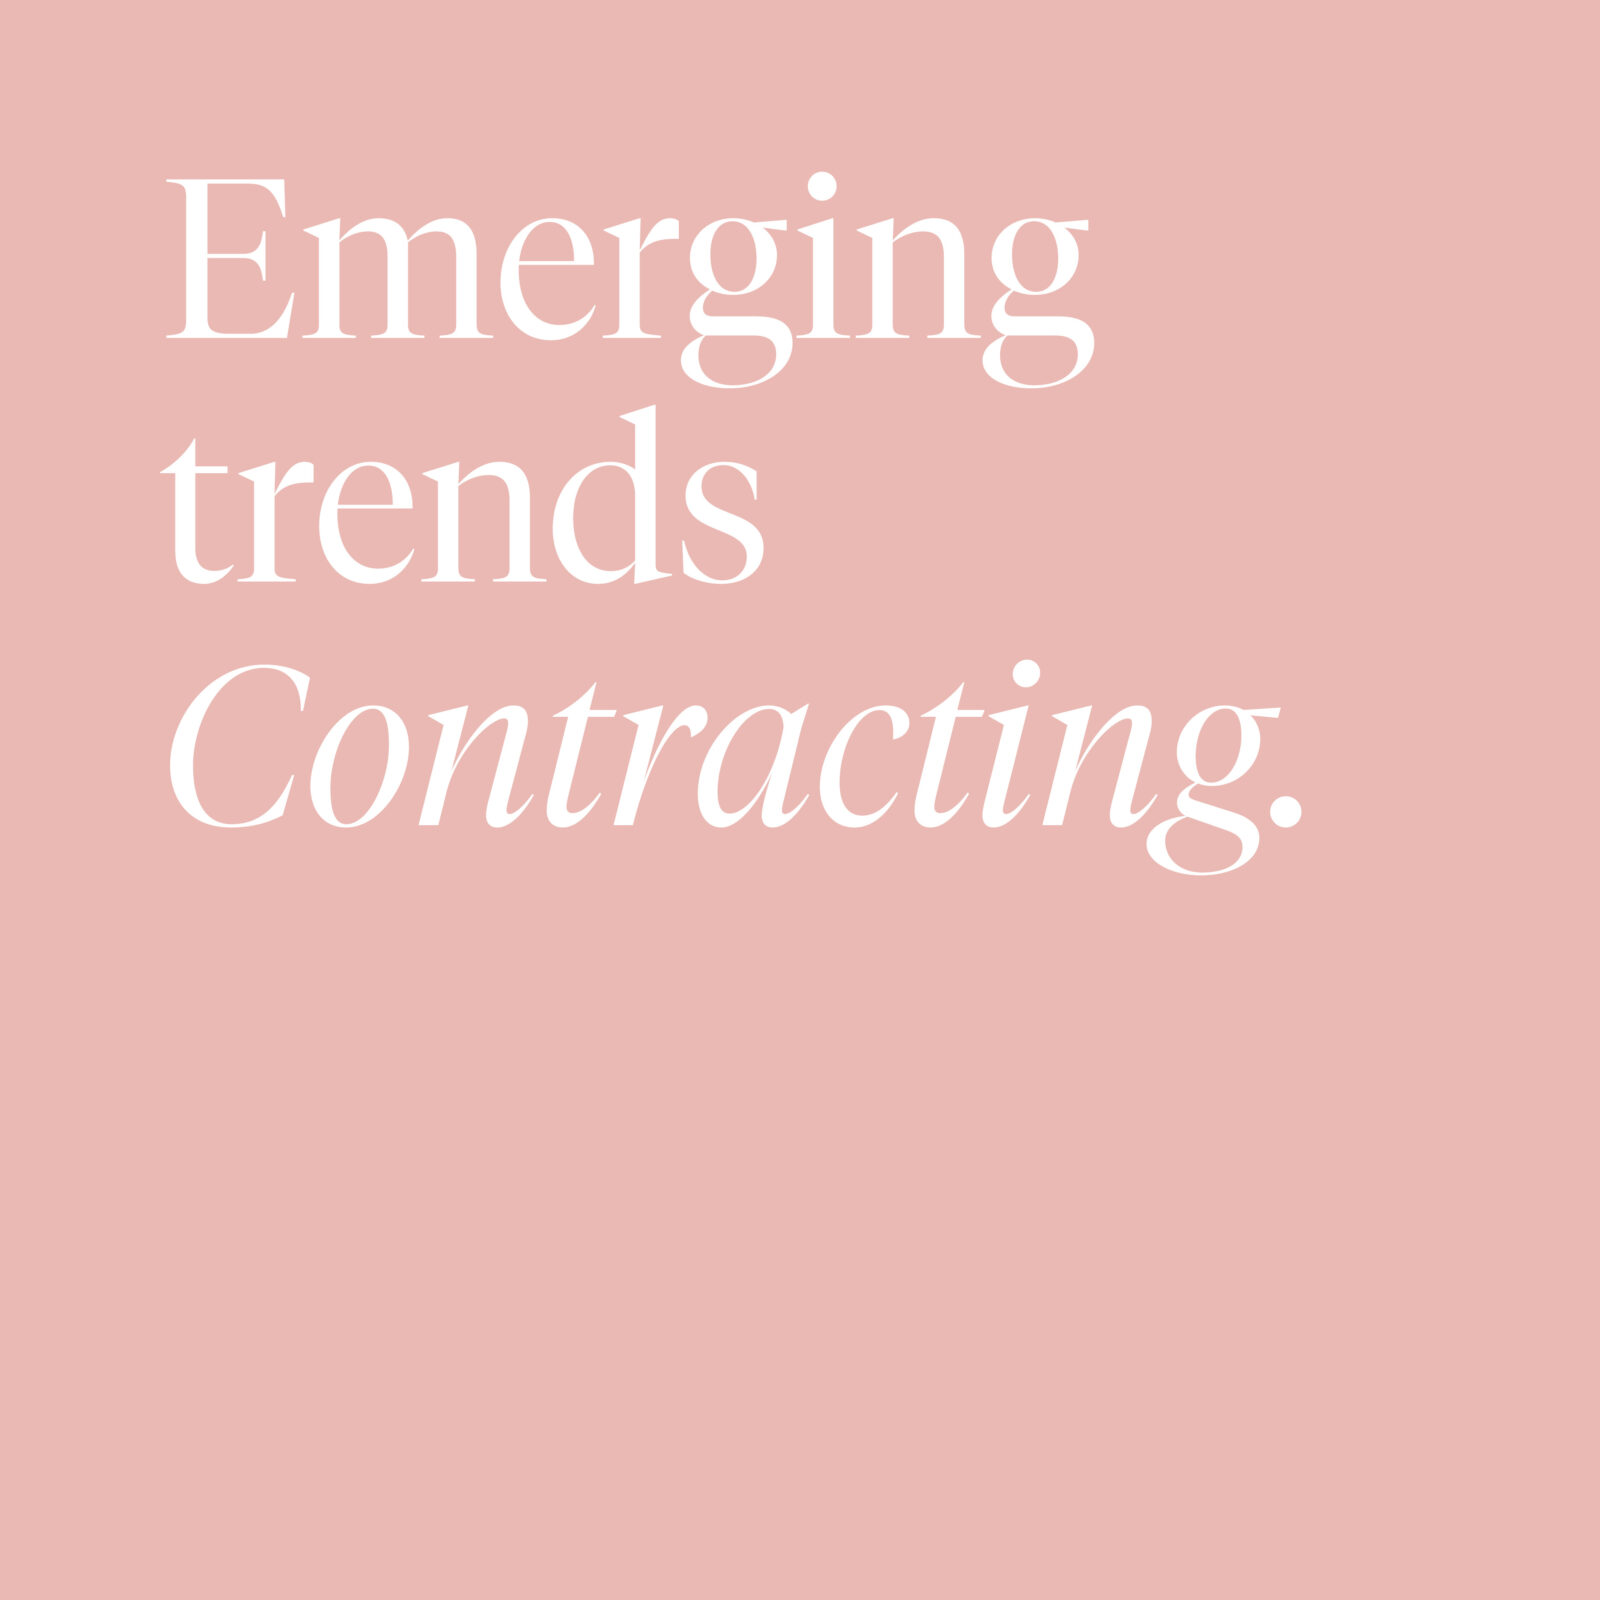 Accounting and Finance: Emerging trends contracting